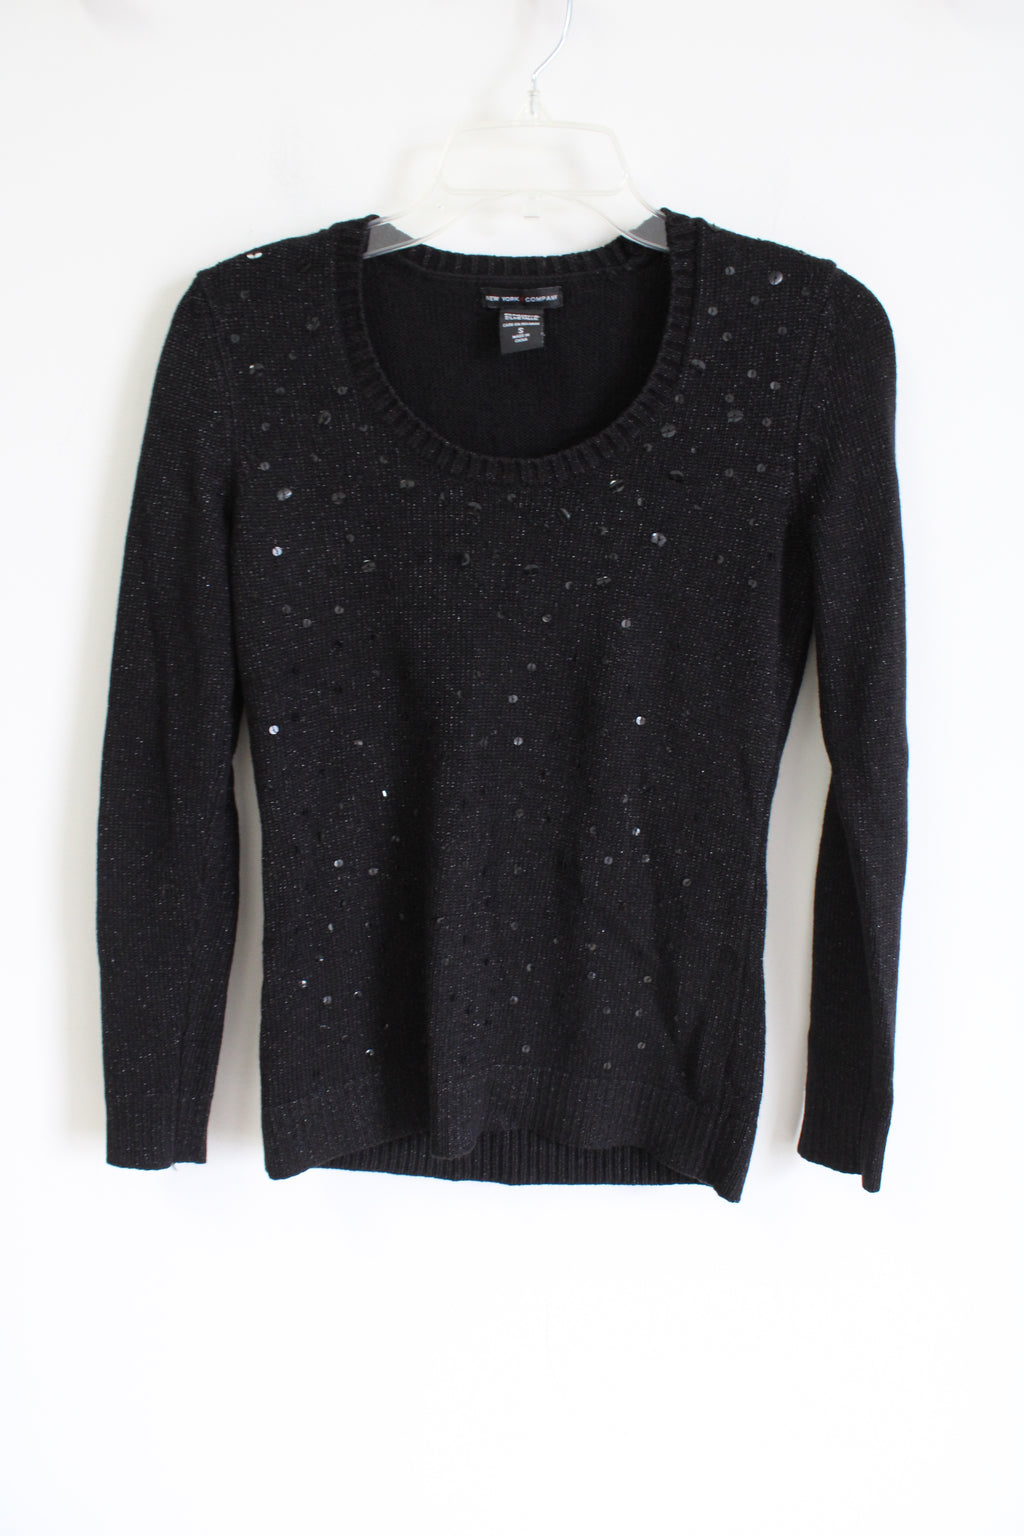 New York & Co. Black Sequined Knit Sweater | S